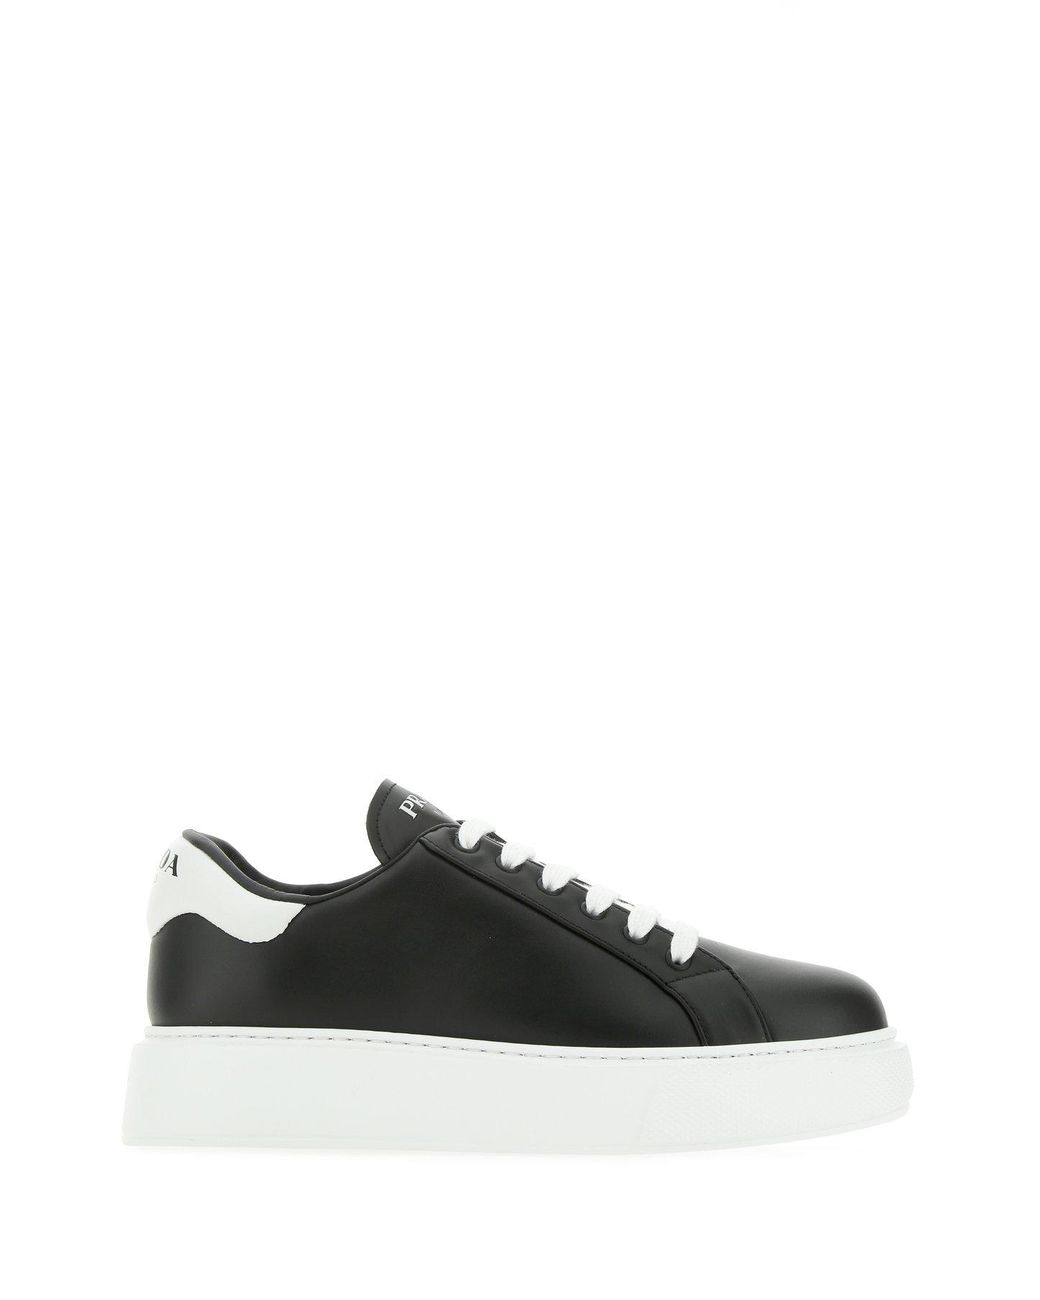 Prada Leather Platform-sole Lace-up Sneakers in Black - Lyst